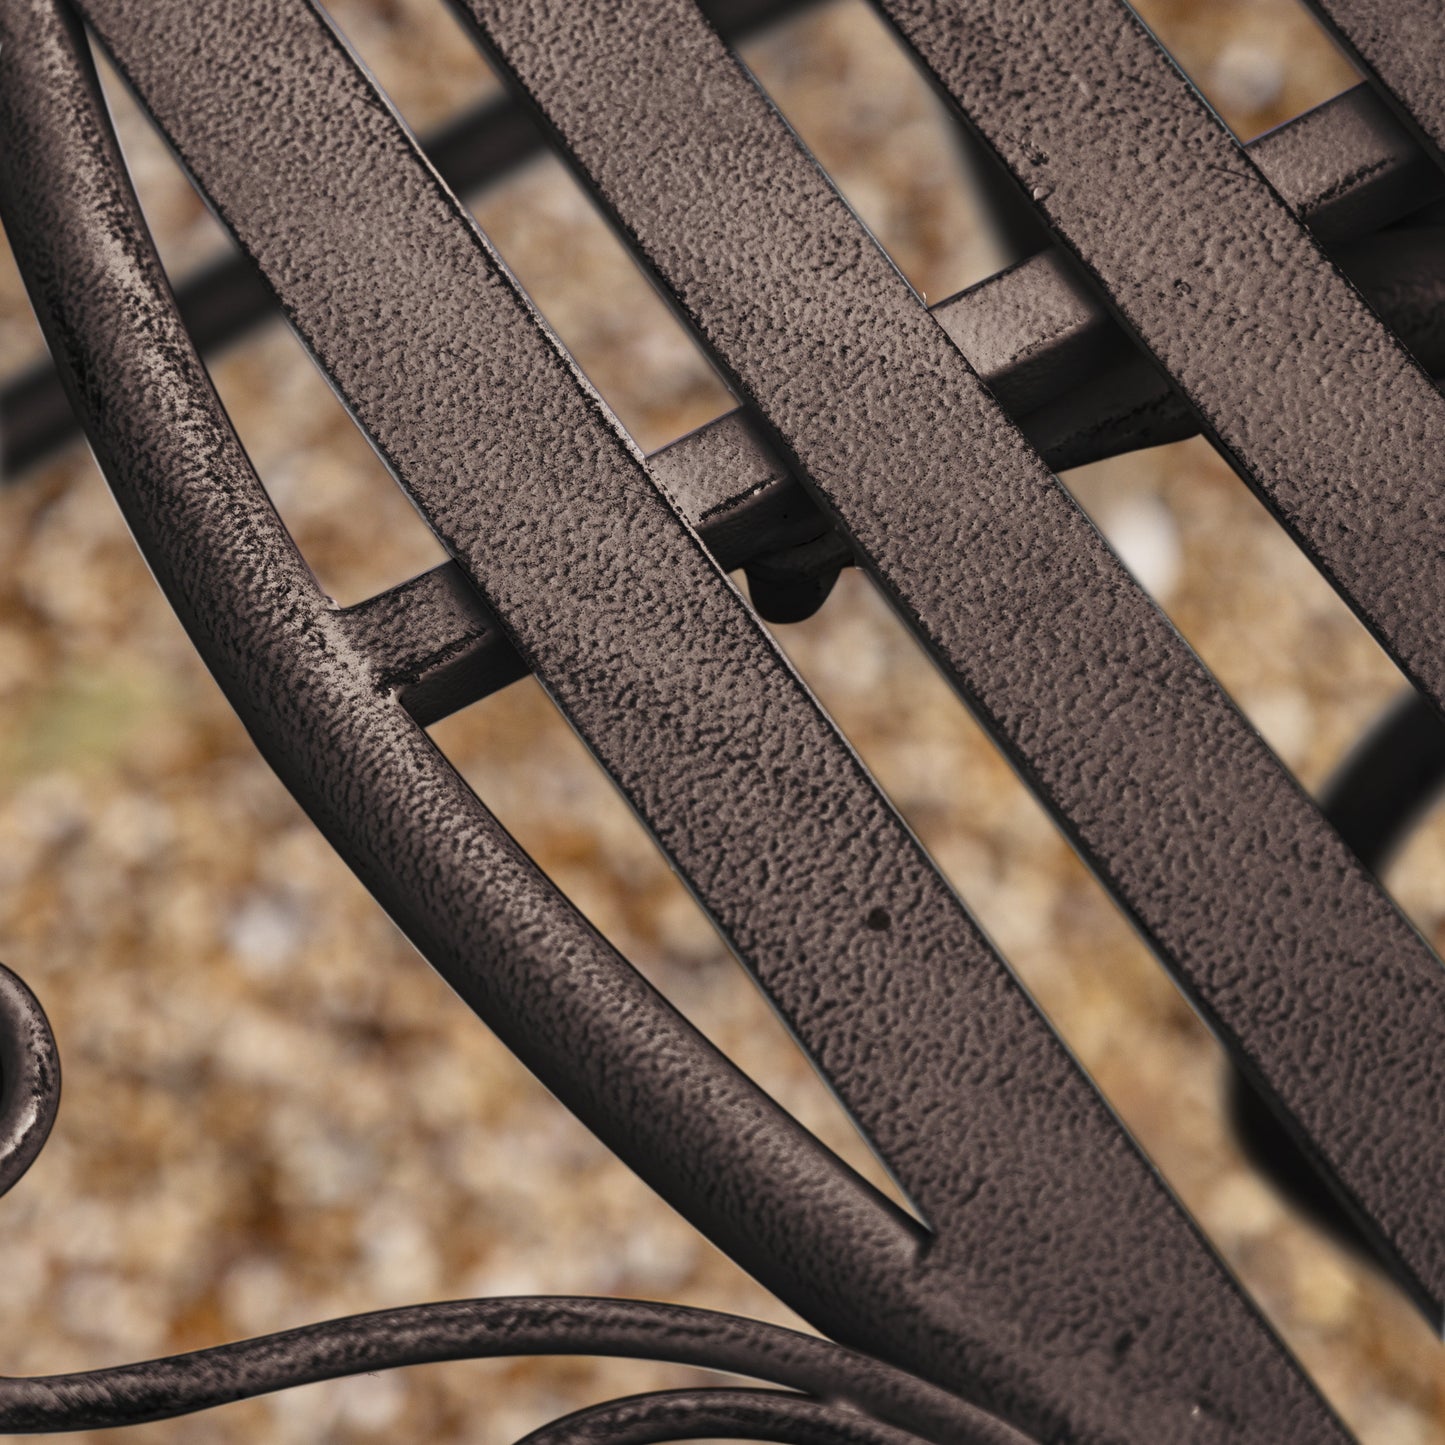 A close up of a Branscombe 2 Seater Bistro Set Noir chair from Kikiathome.co.uk, perfect for interior decor.